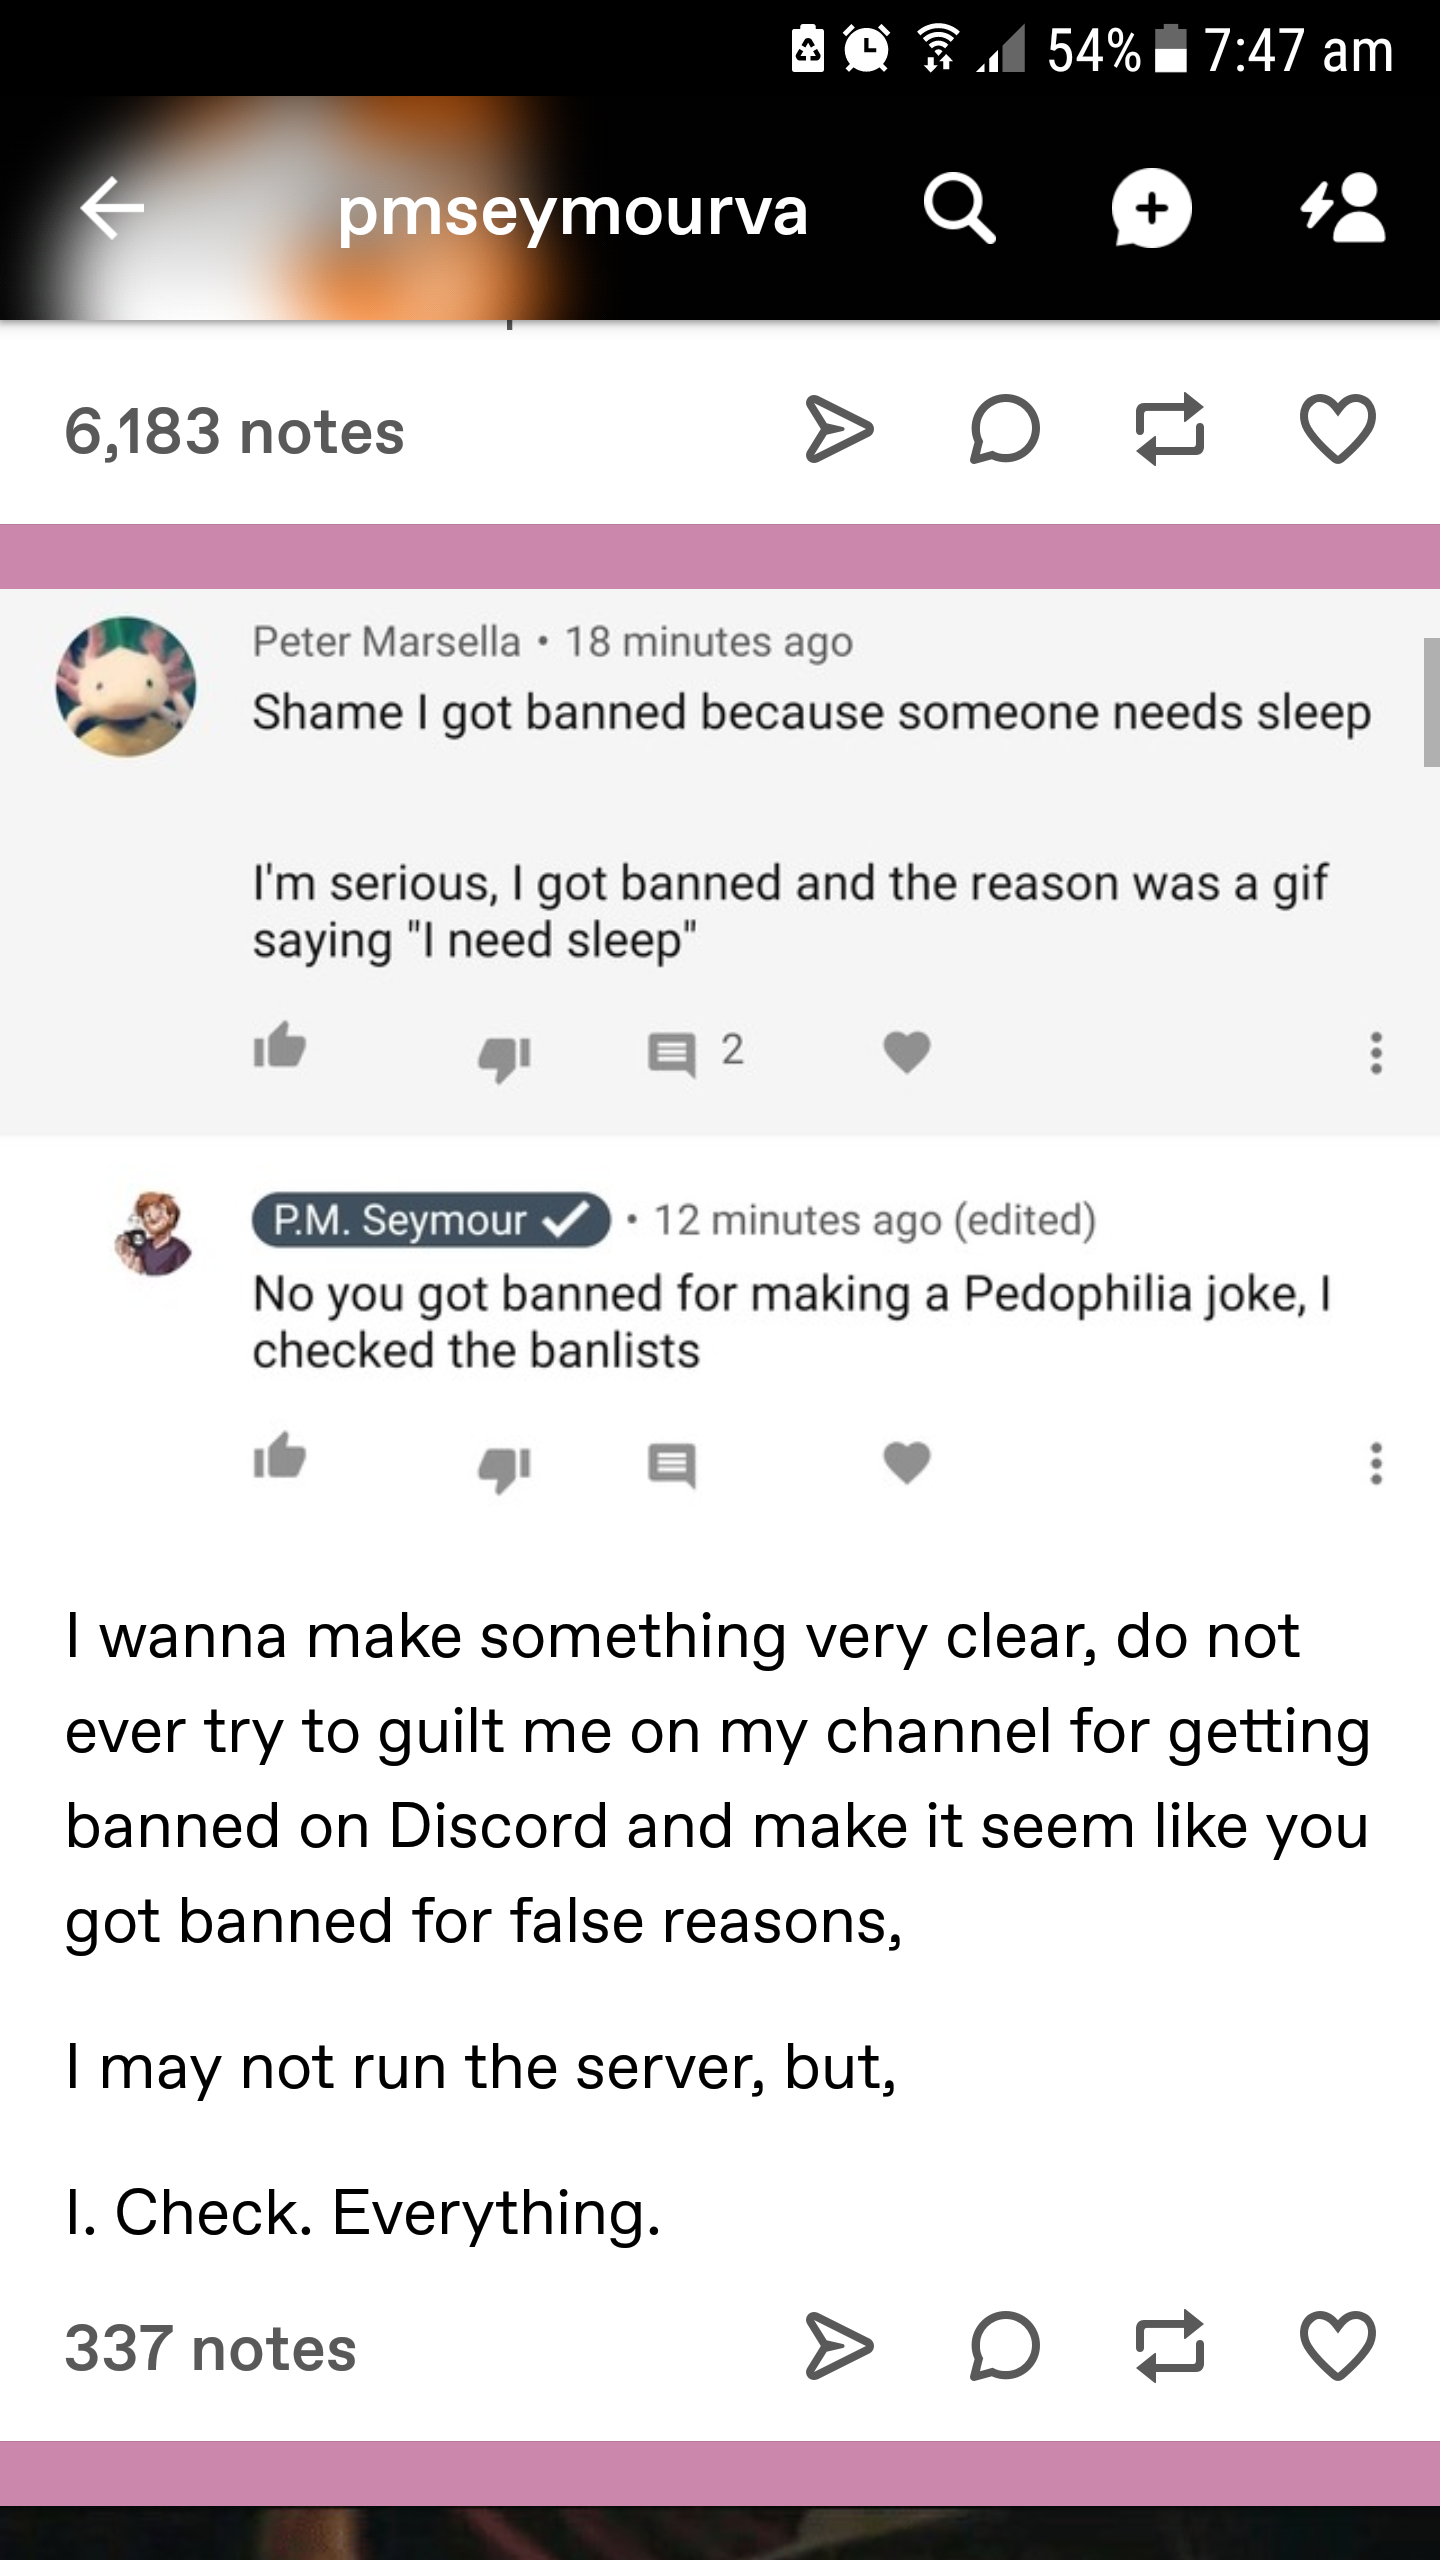 screenshot - 204 54% pmseymourva a 4 6,183 notes Peter Marsella. 18 minutes ago Shame I got banned because someone needs sleep I'm serious, I got banned and the reason was a gif saying "I need sleep 412 Pm Seymour 12 minutes ago edited No you got banned f